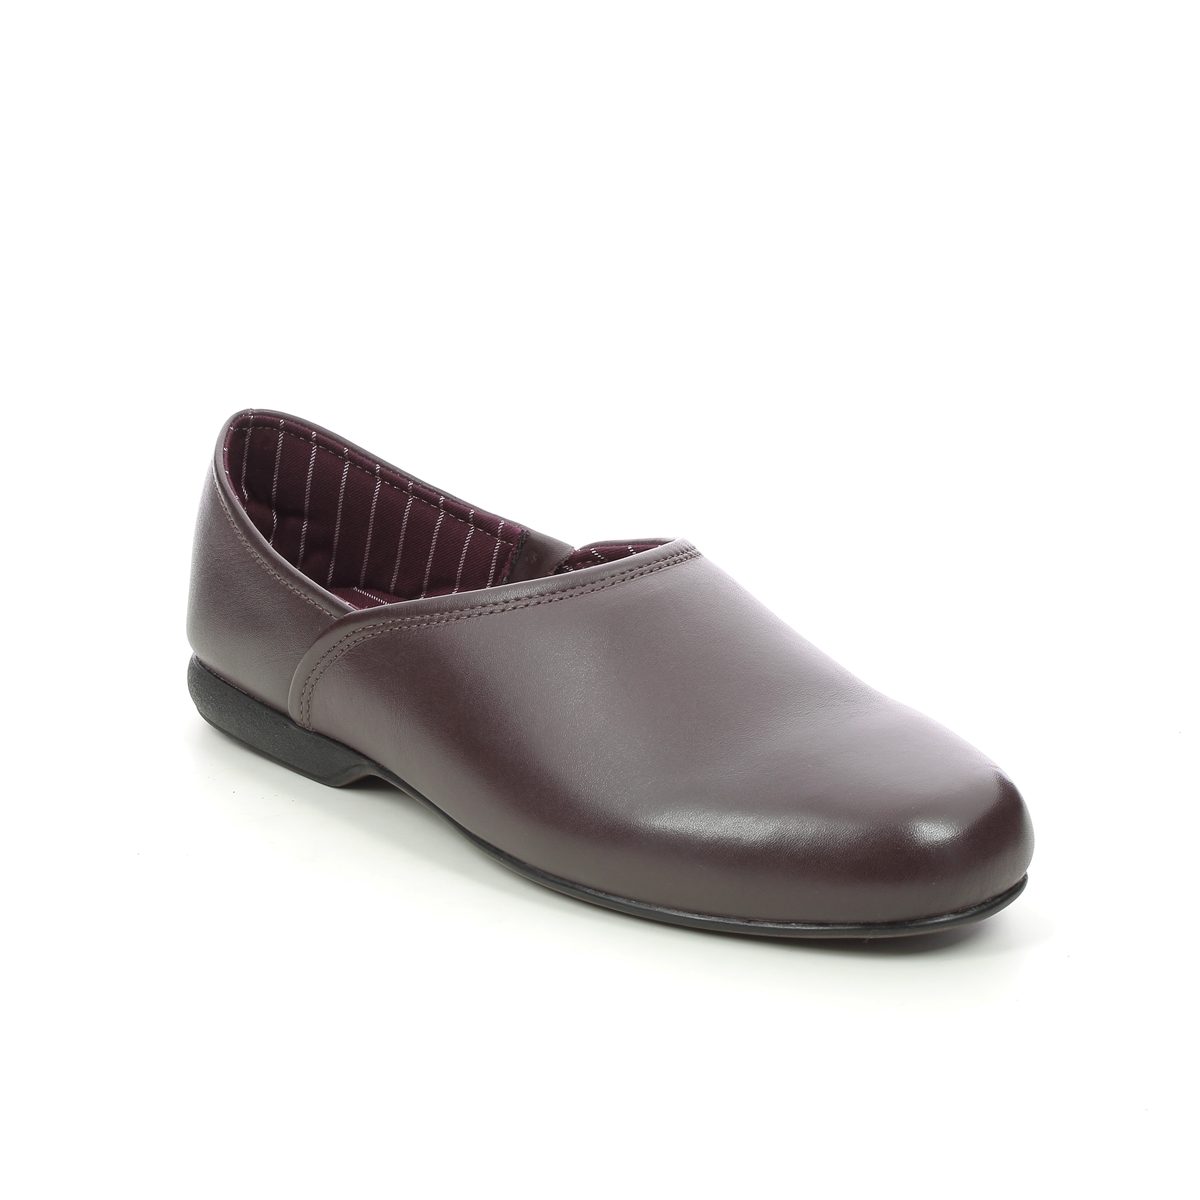 Clarks Harston Elite Burgundy Leather Mens Slippers 447217G In Size 9 In Plain Burgundy Leather G Width Fitting